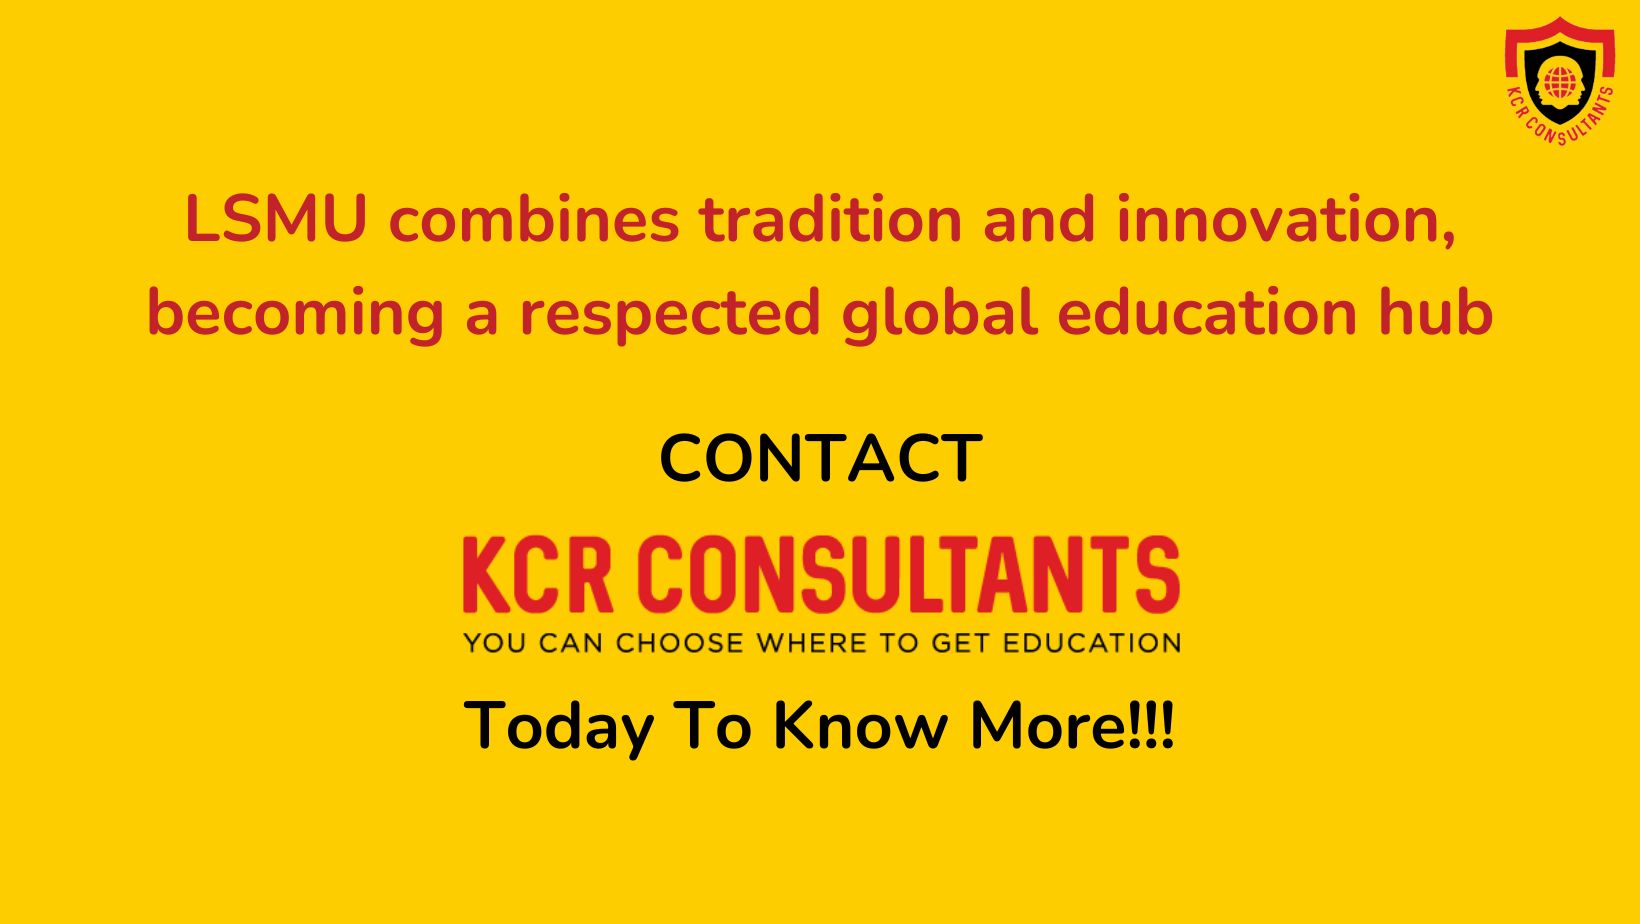 Lithuanian University of Health Sciences - KCR Consultants - Contact us